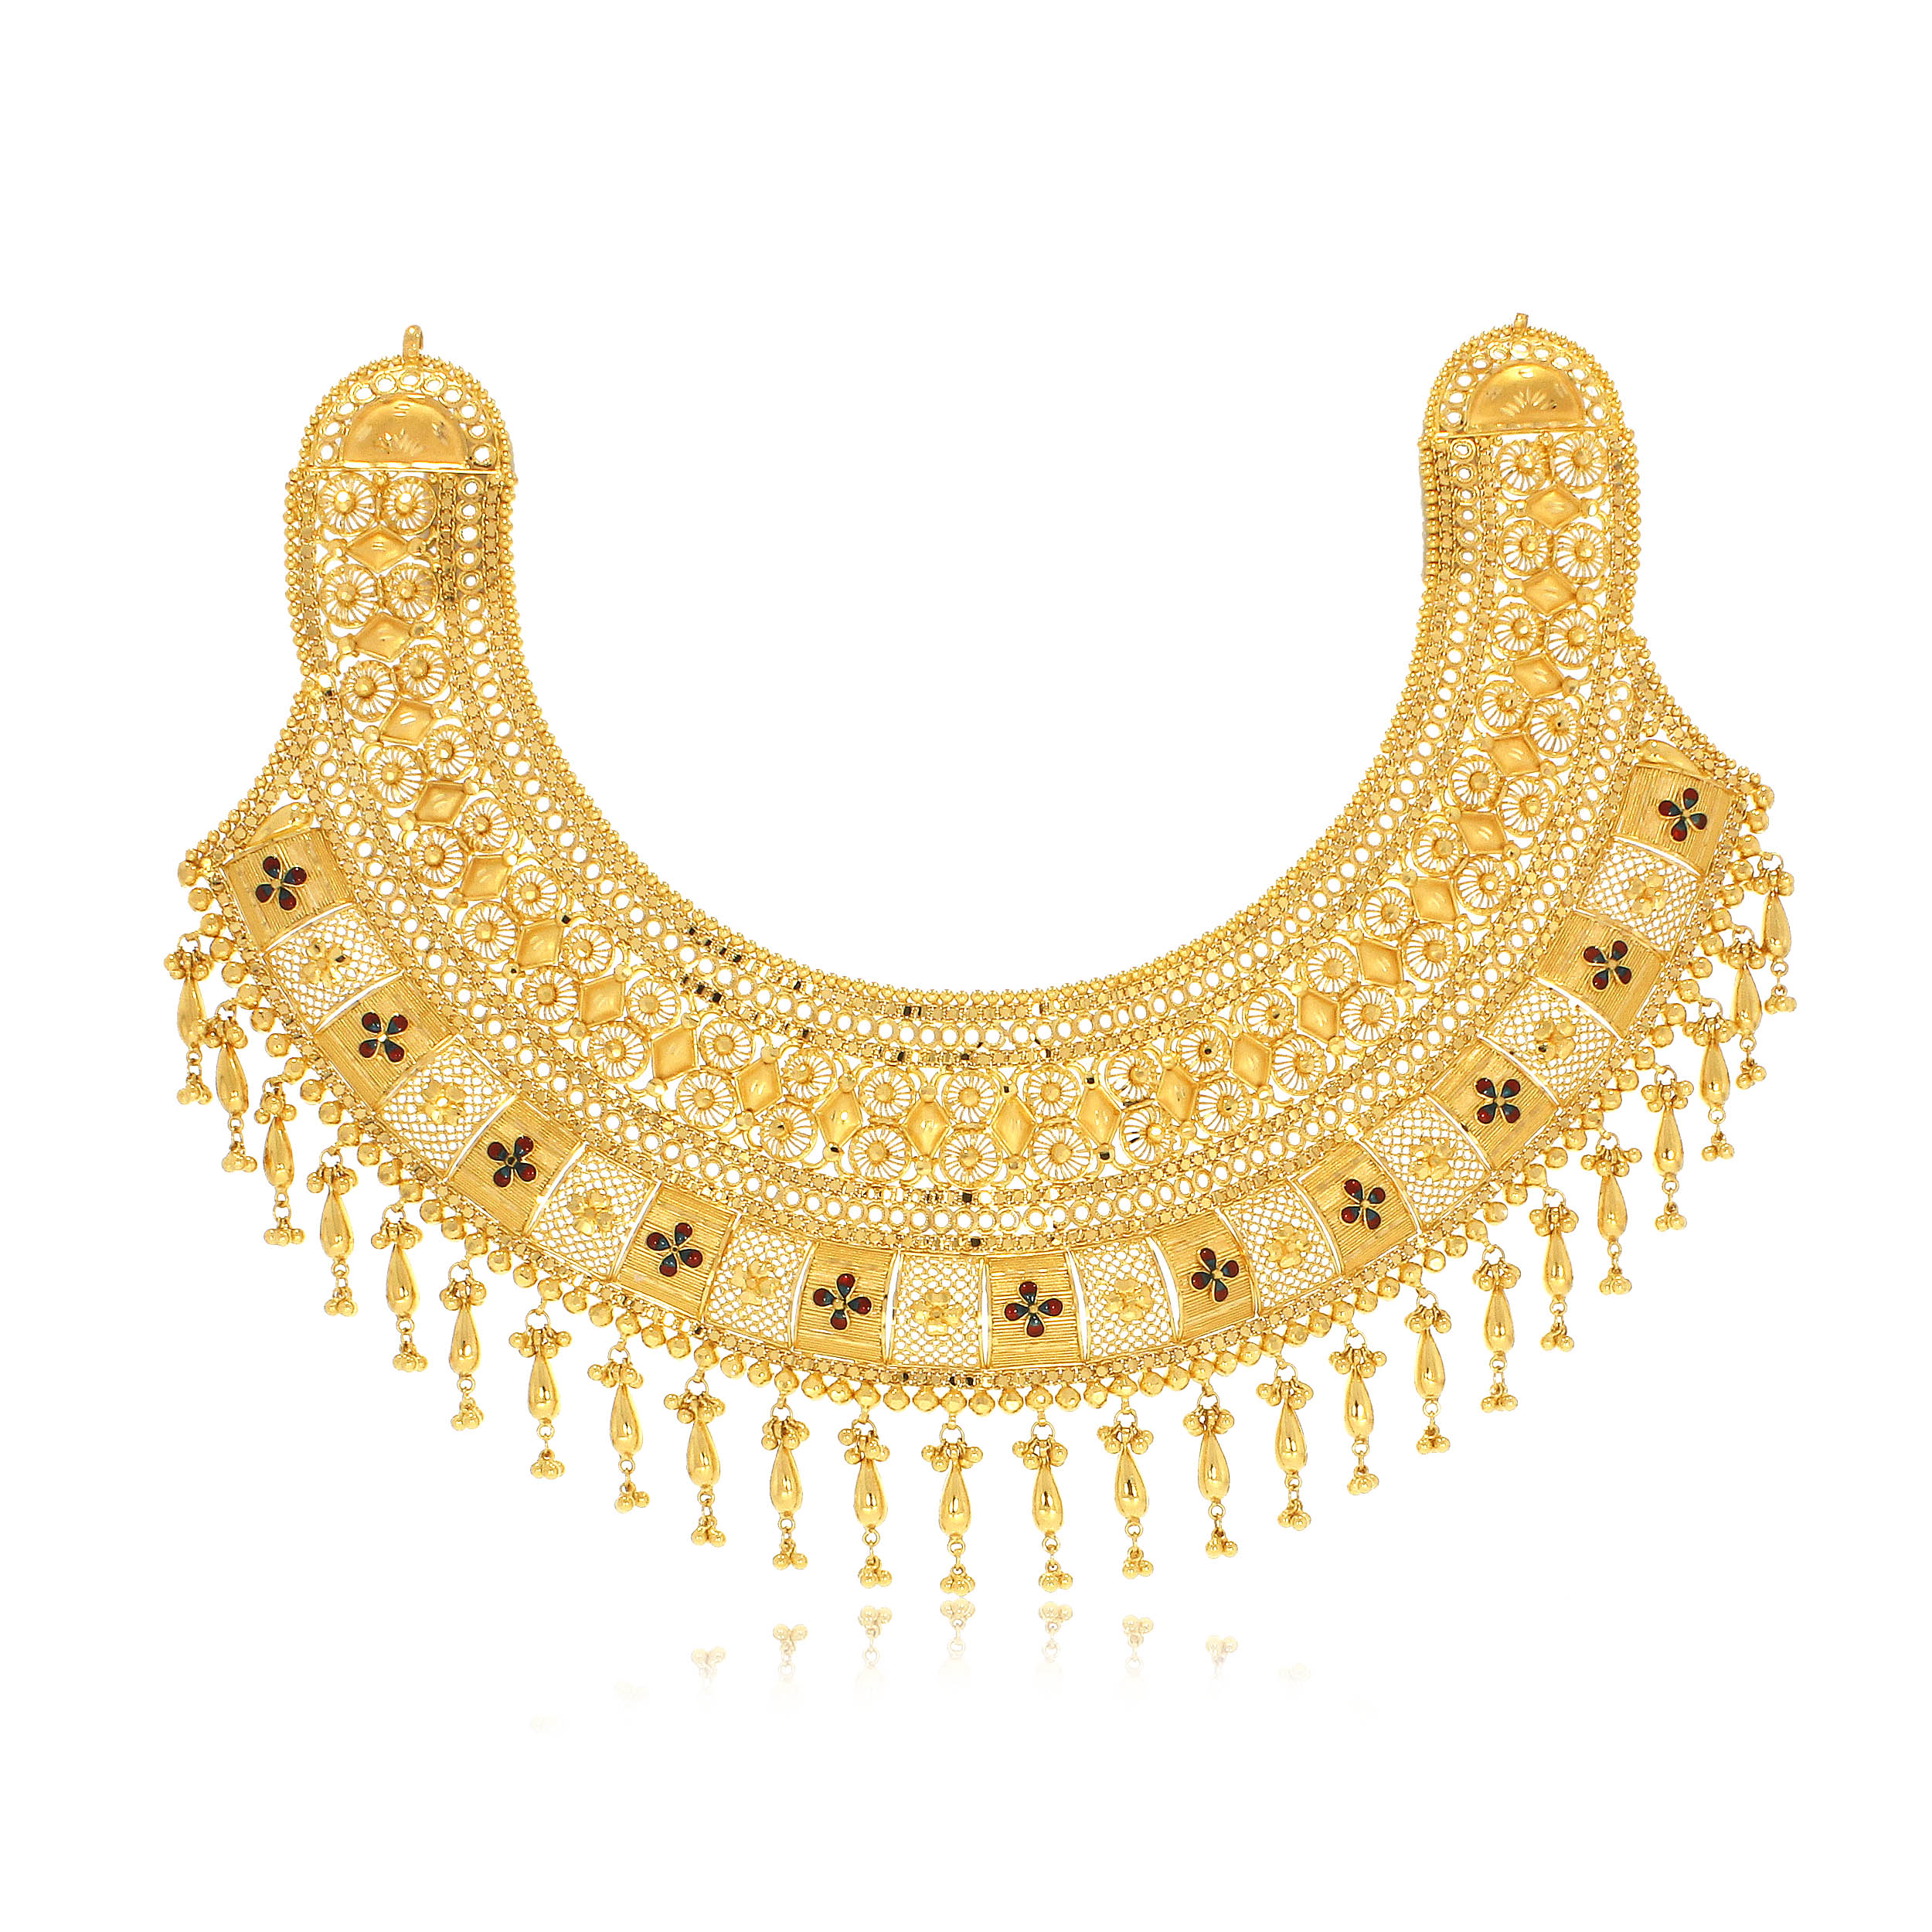 RAO  AABI JEWELS 22 CARAT BIS HALLMARK GOLD CHOKER NECKLACE FOR 